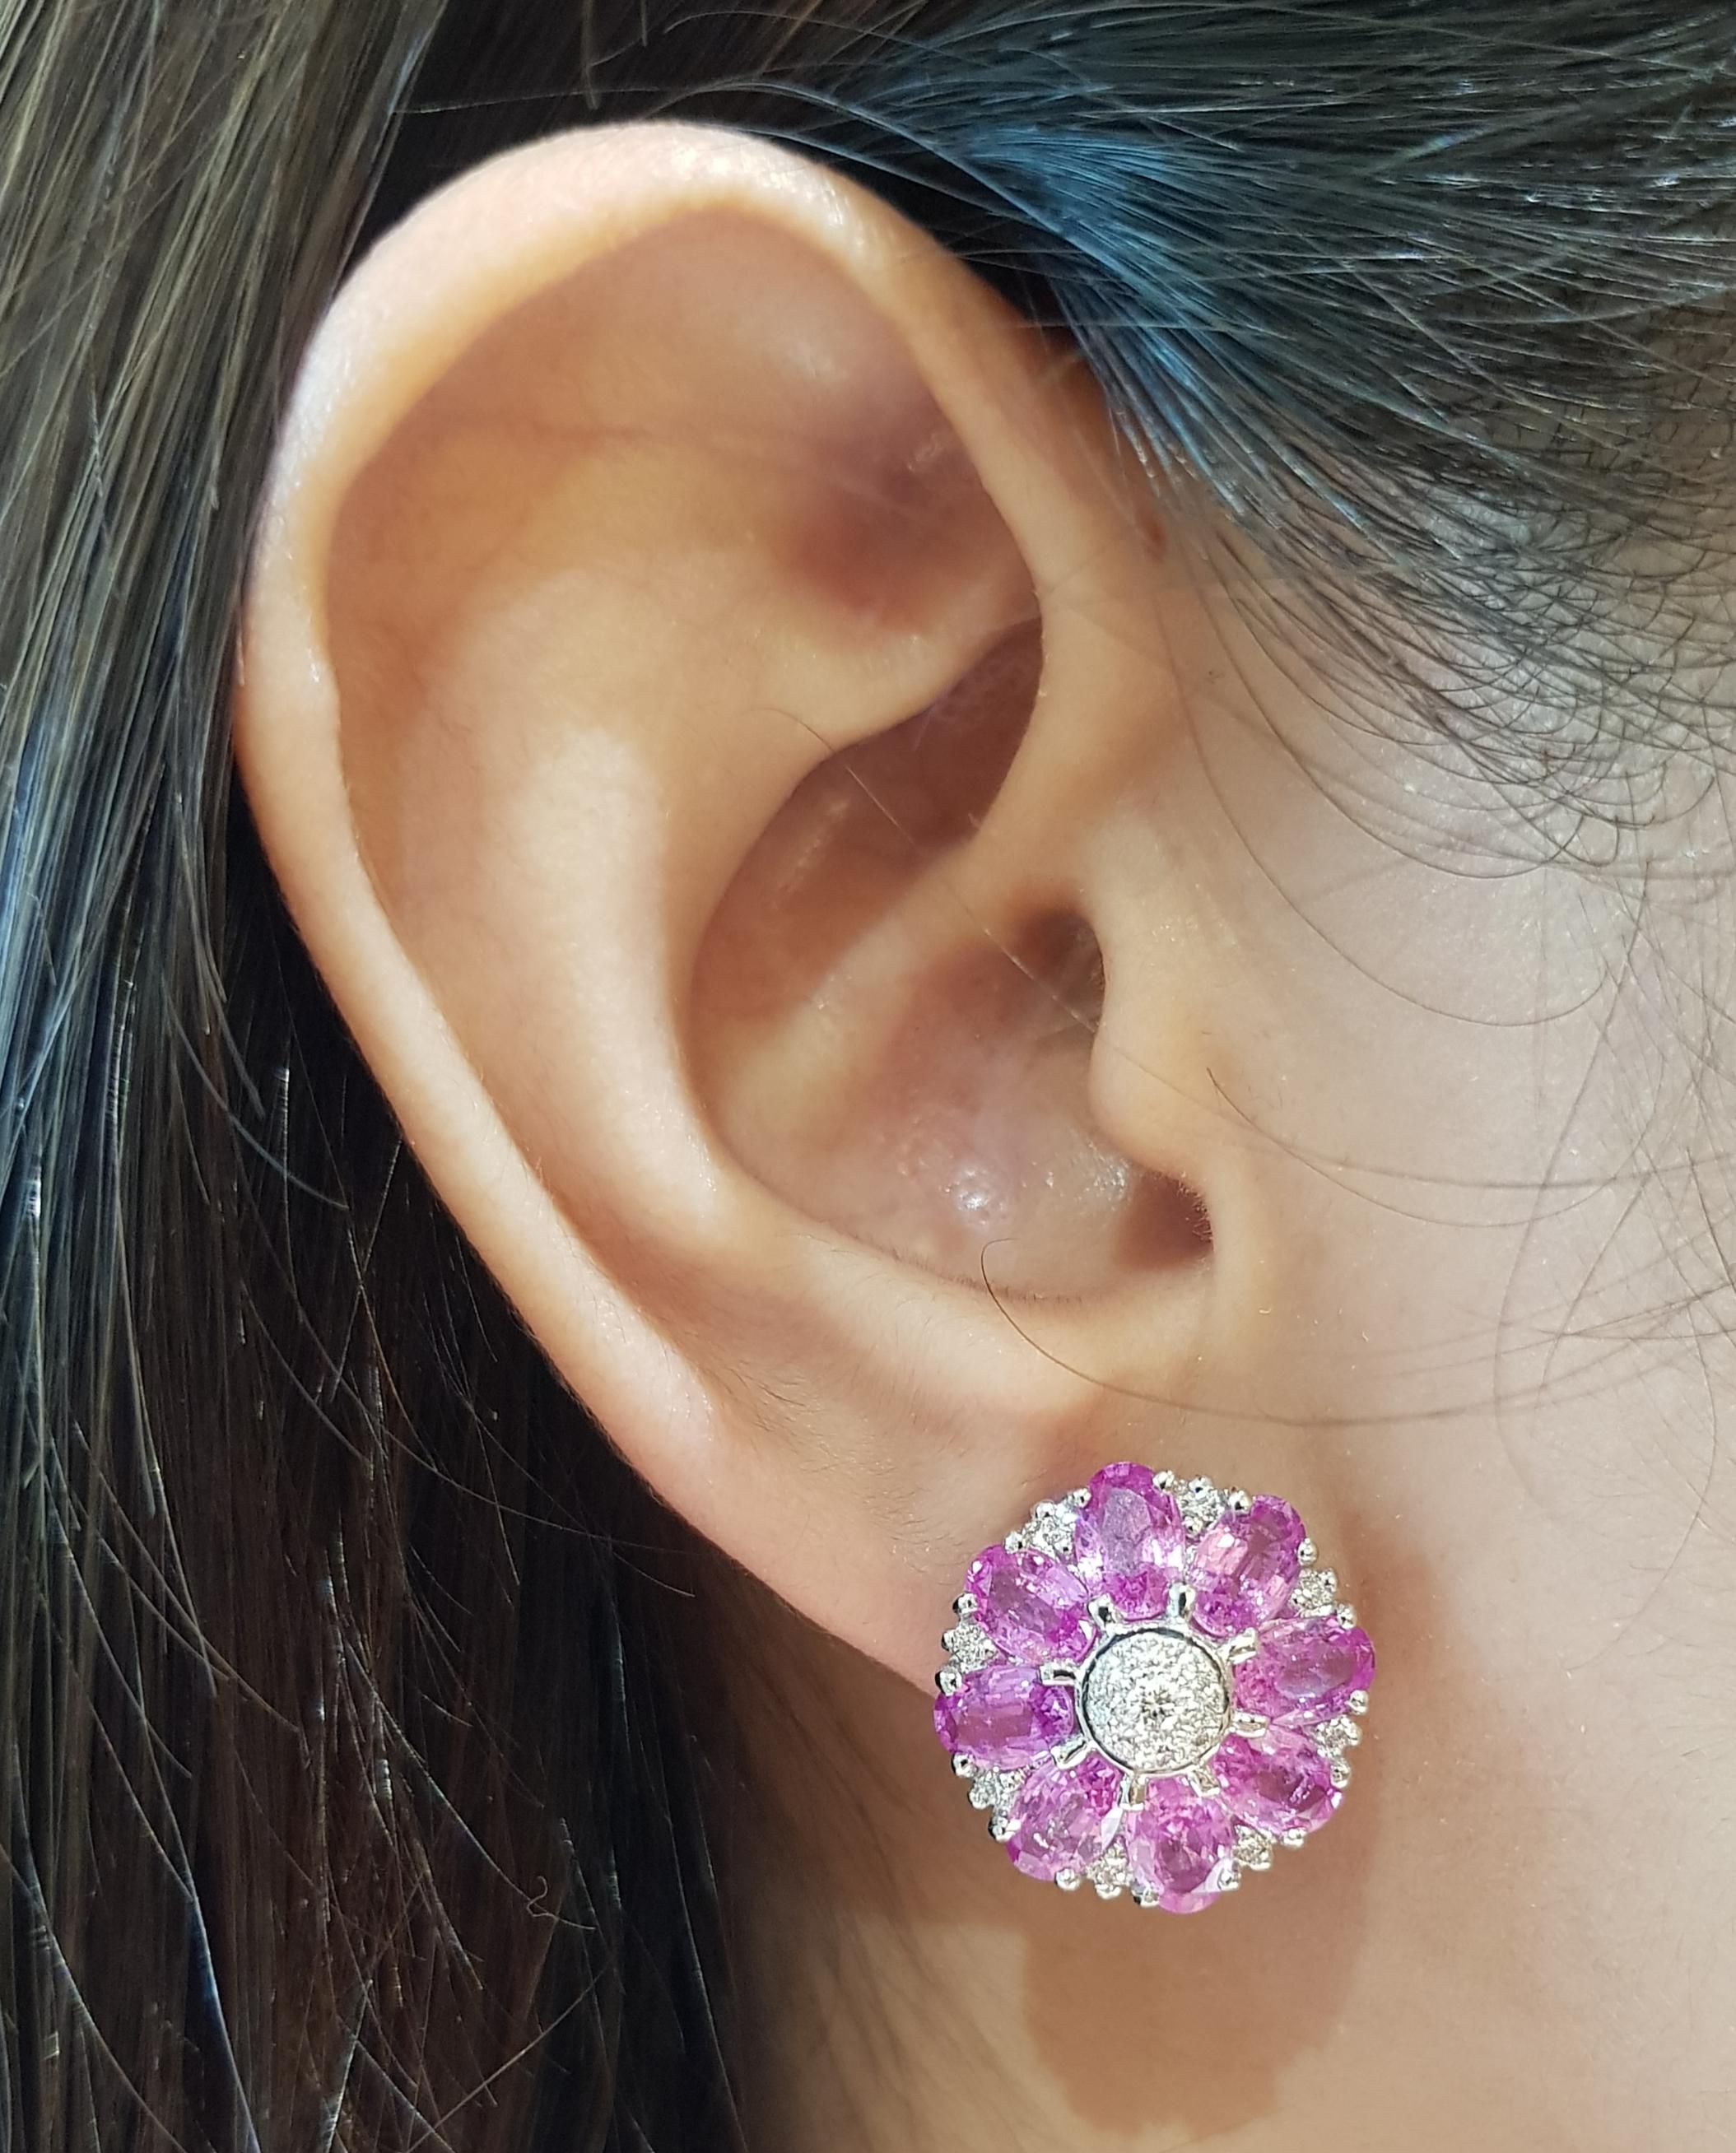 Pink Sapphire 8.25 carats with Diamond 0.39 carat Earrings set in 18 Karat White Gold Settings

Width:  1.6 cm 
Length:  1.6 cm
Total Weight: 14.05 grams

